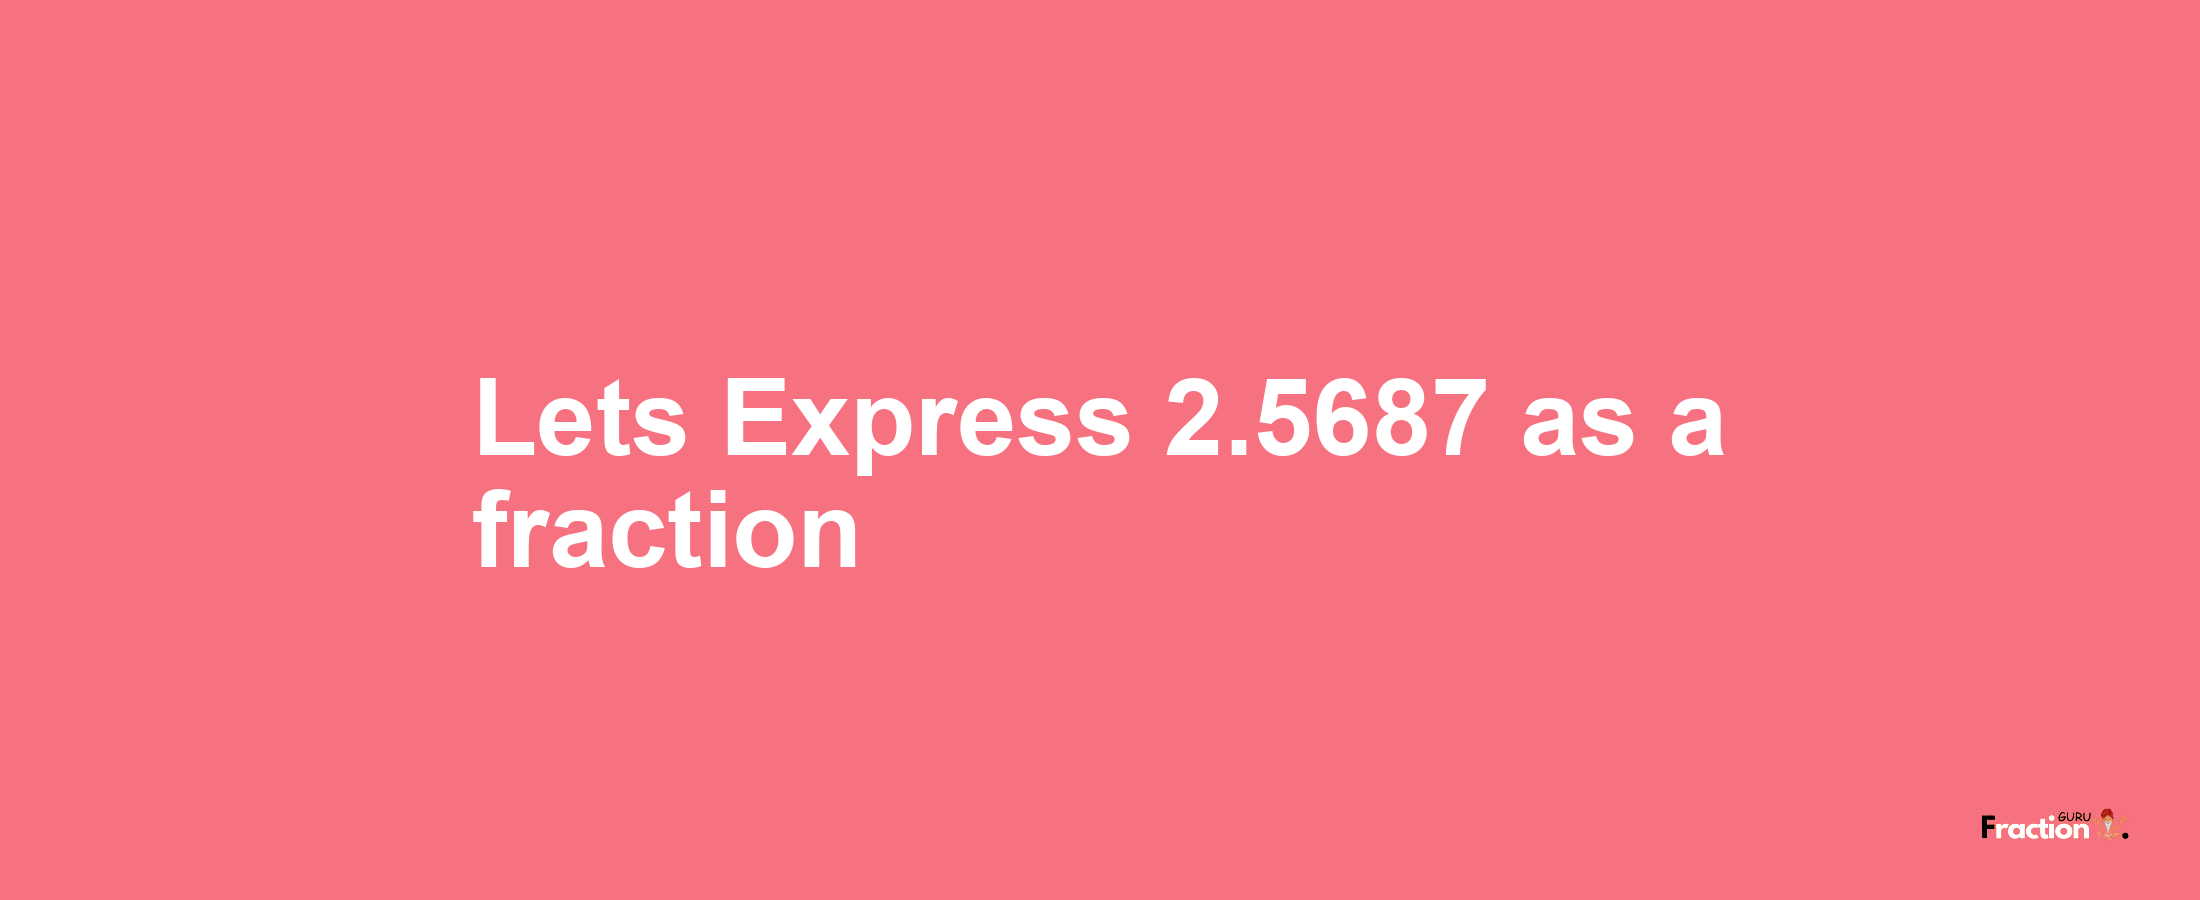 Lets Express 2.5687 as afraction